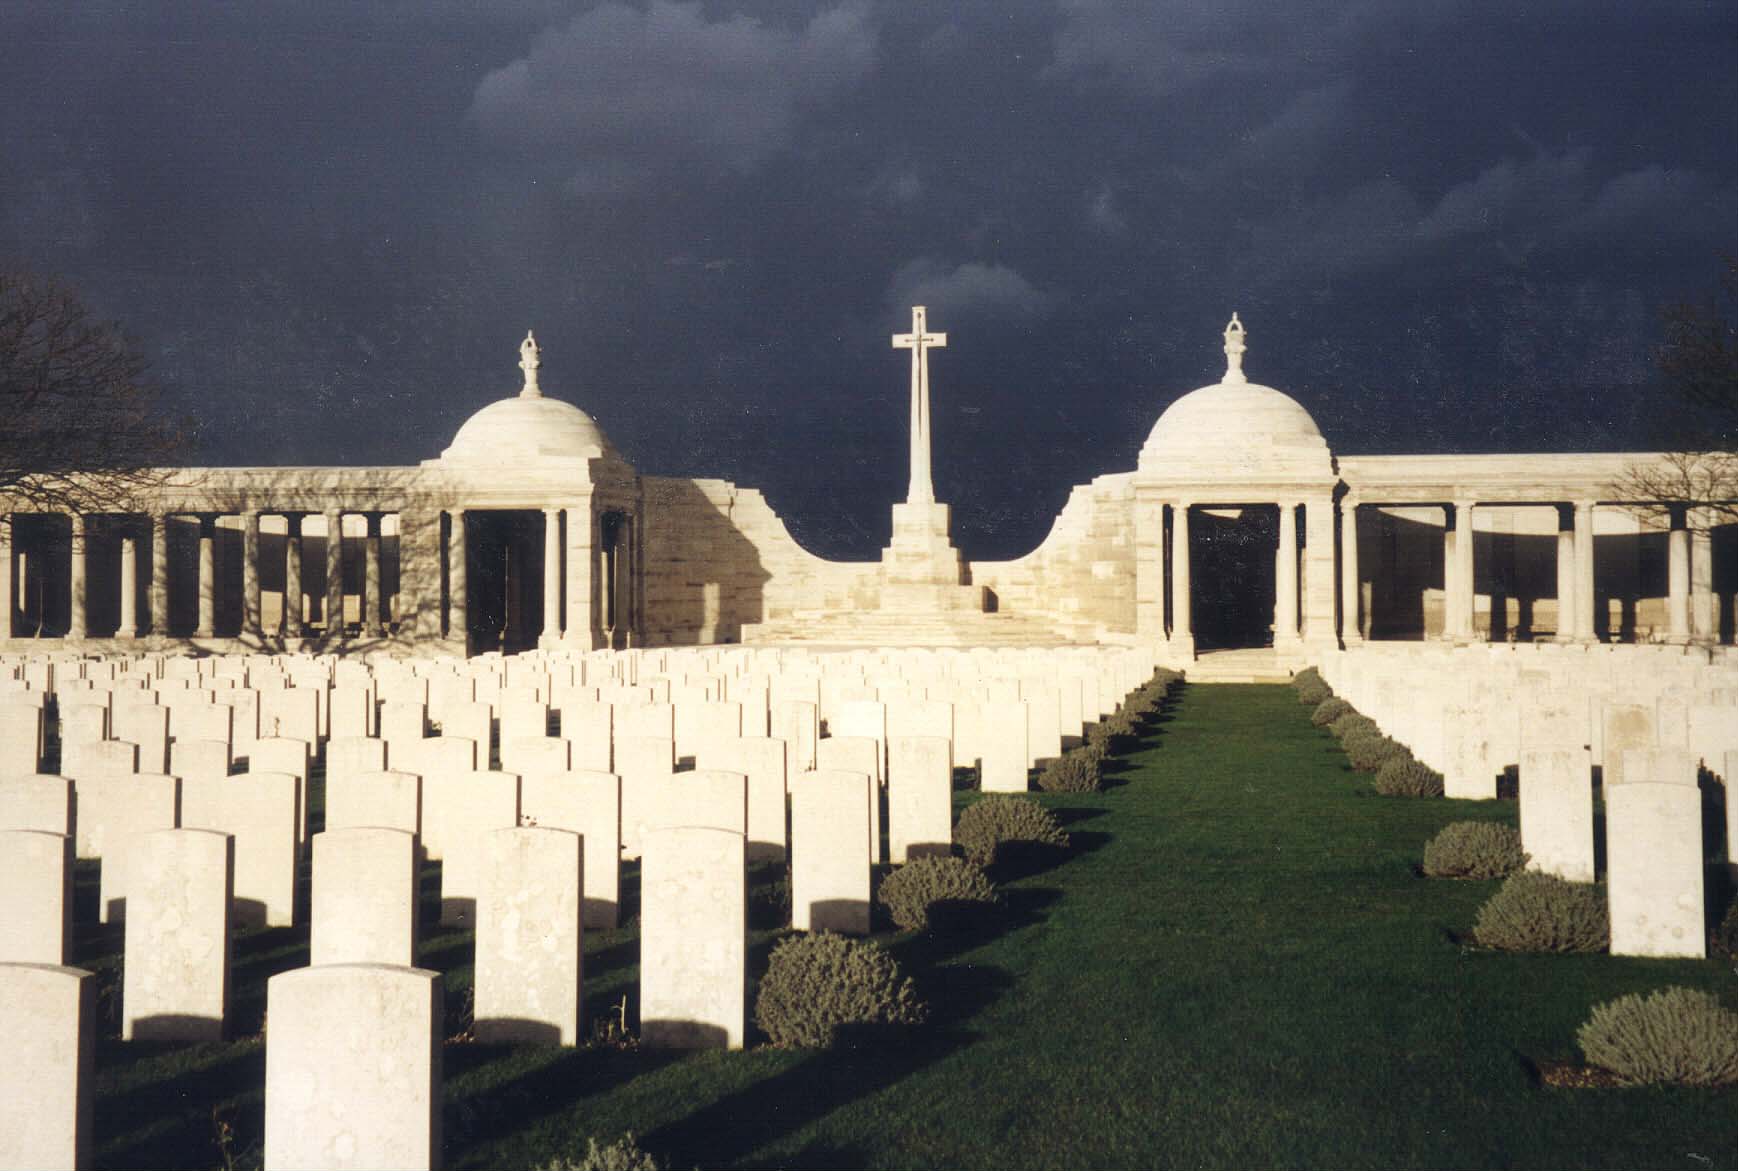 Photo of Loos memorial. Rows of headstones with a grass path leading to a stone memorial with central cross with walls of columns either side.